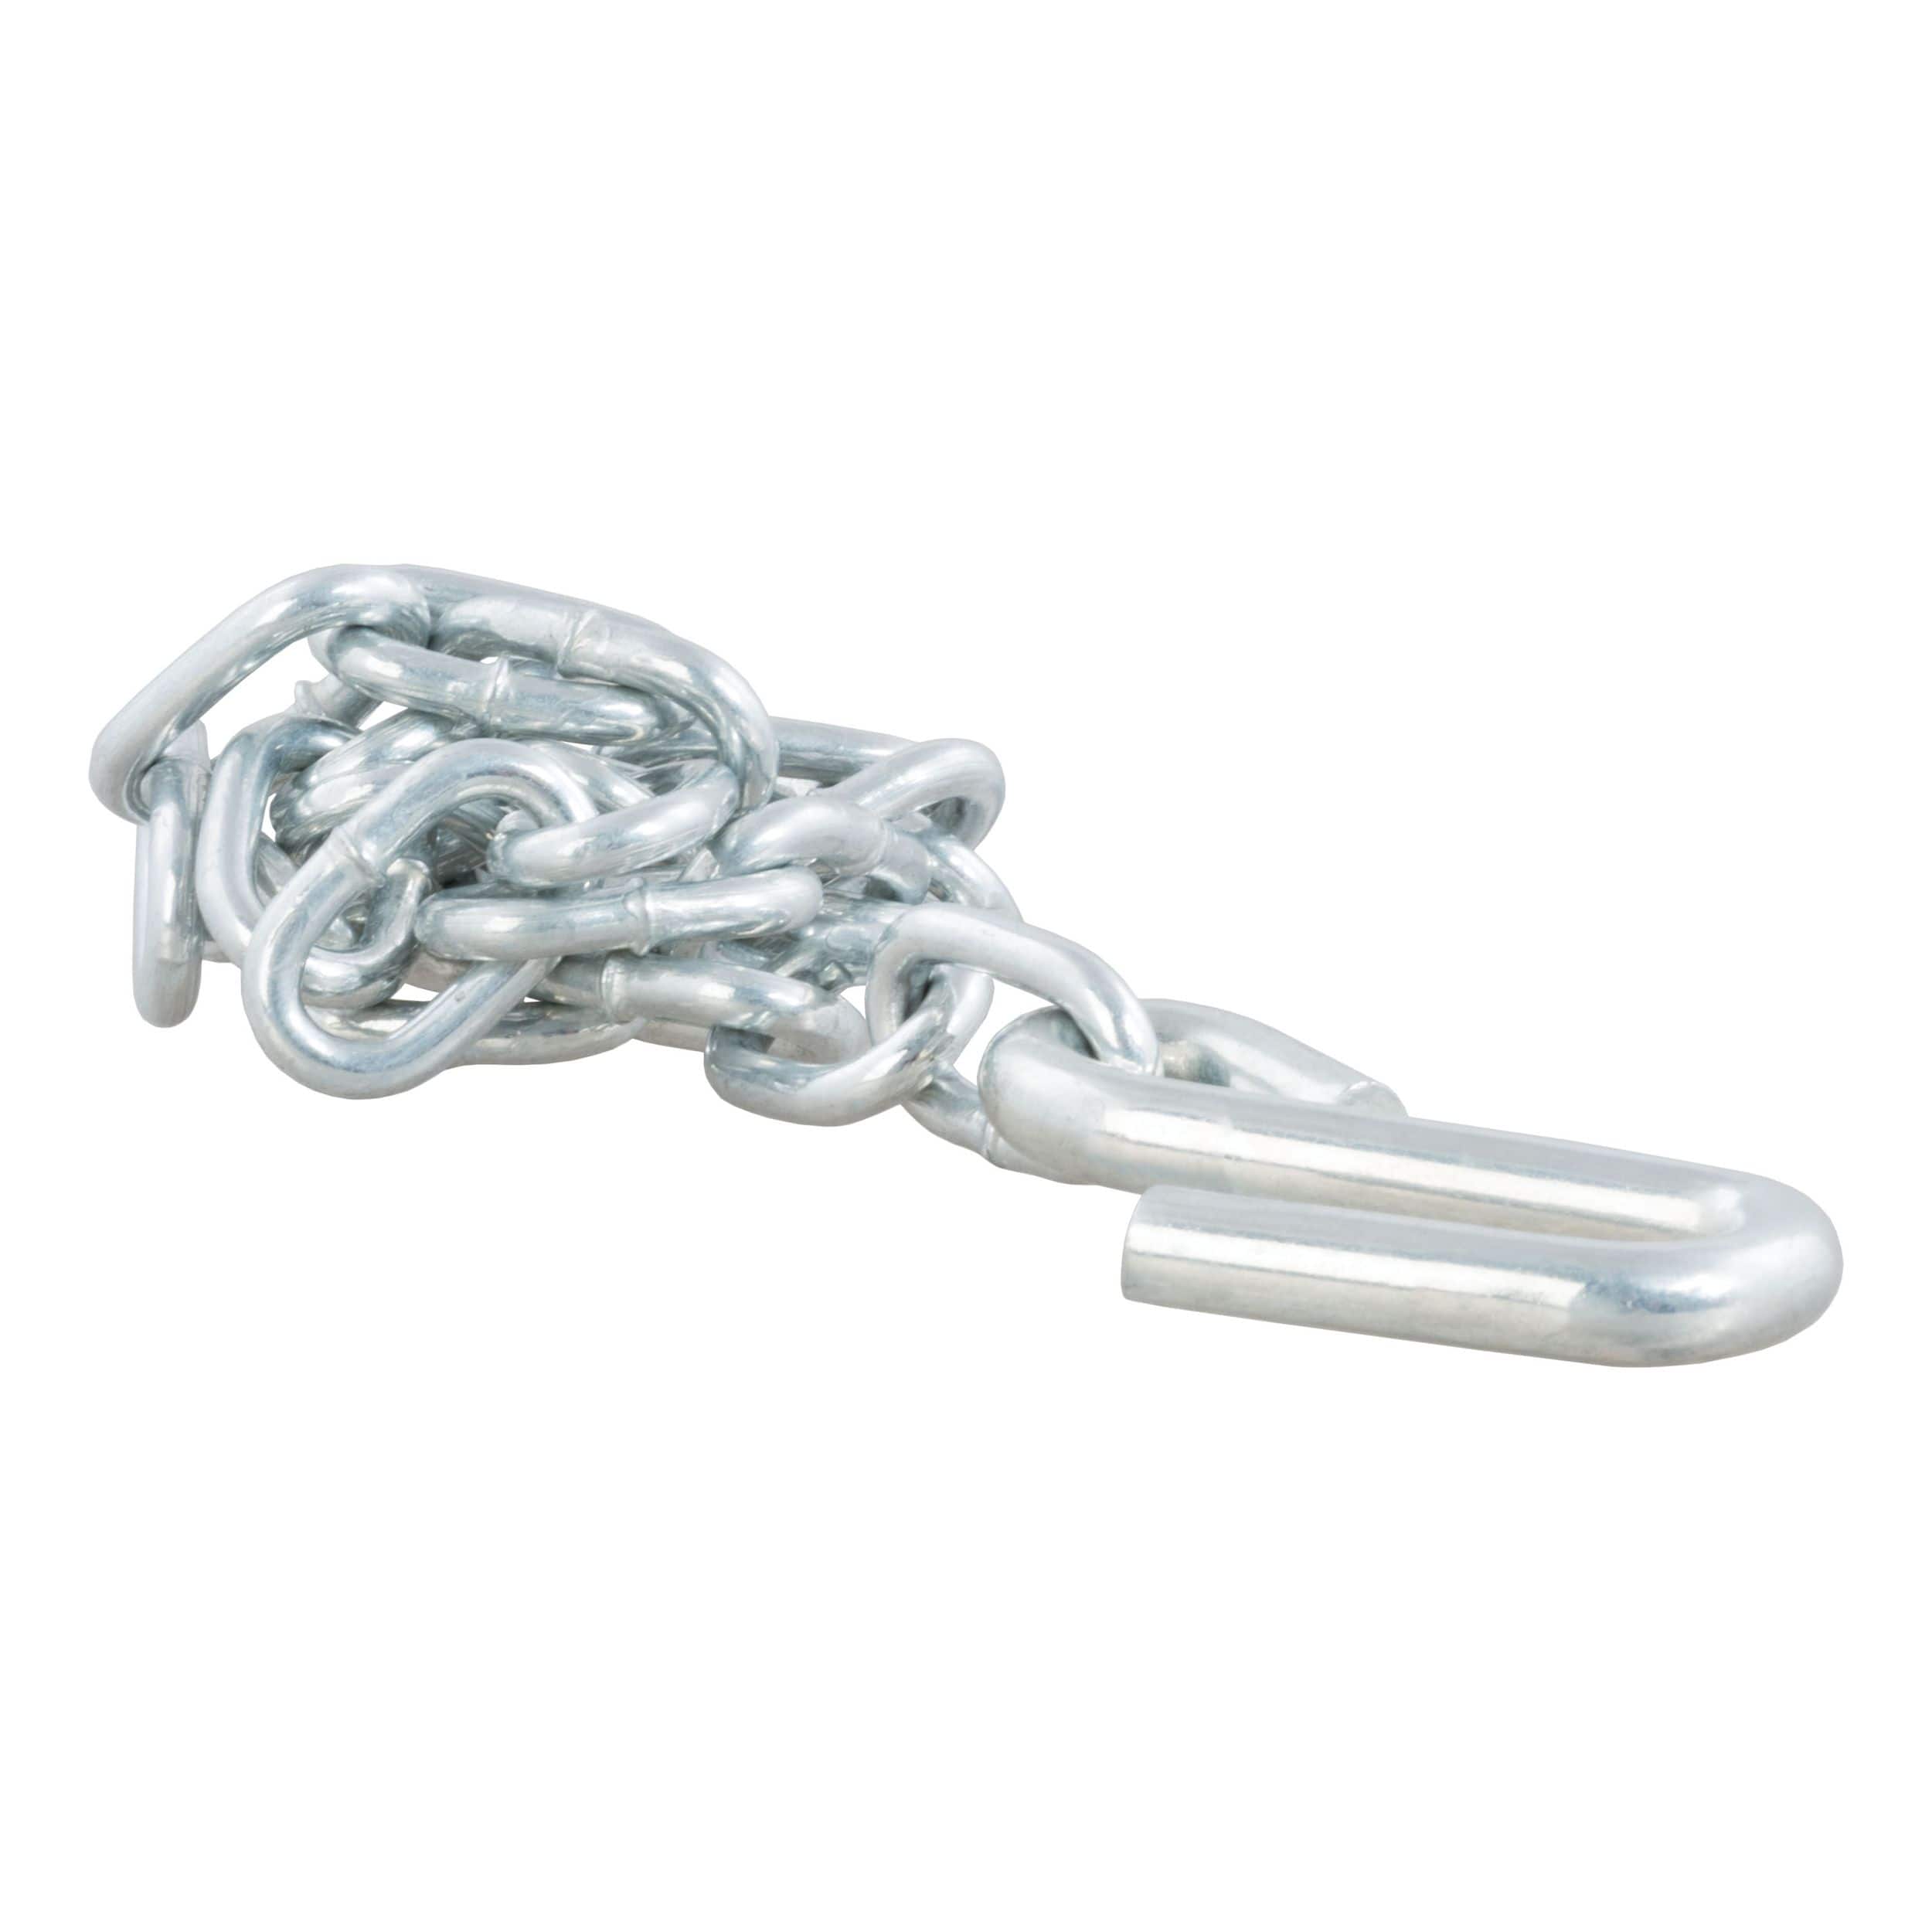 CURT Safety Chain with S-Hook, 27-in